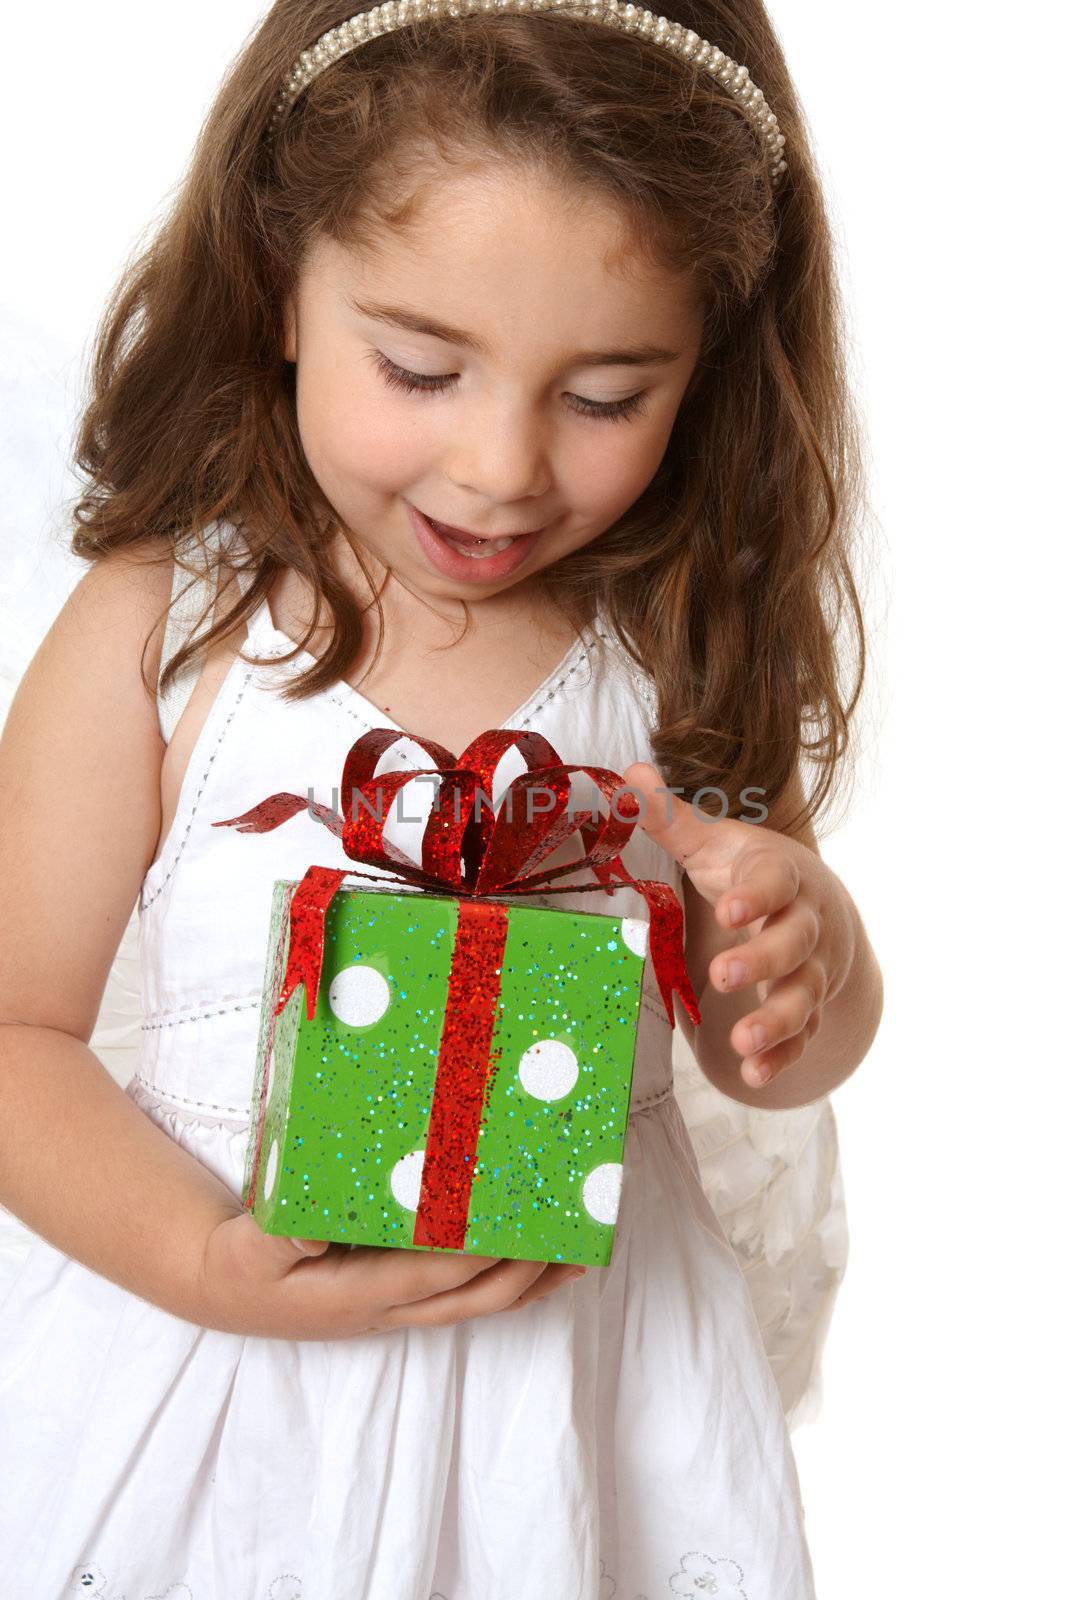 A little girl with browin hair looks down in delight at a Christmas present